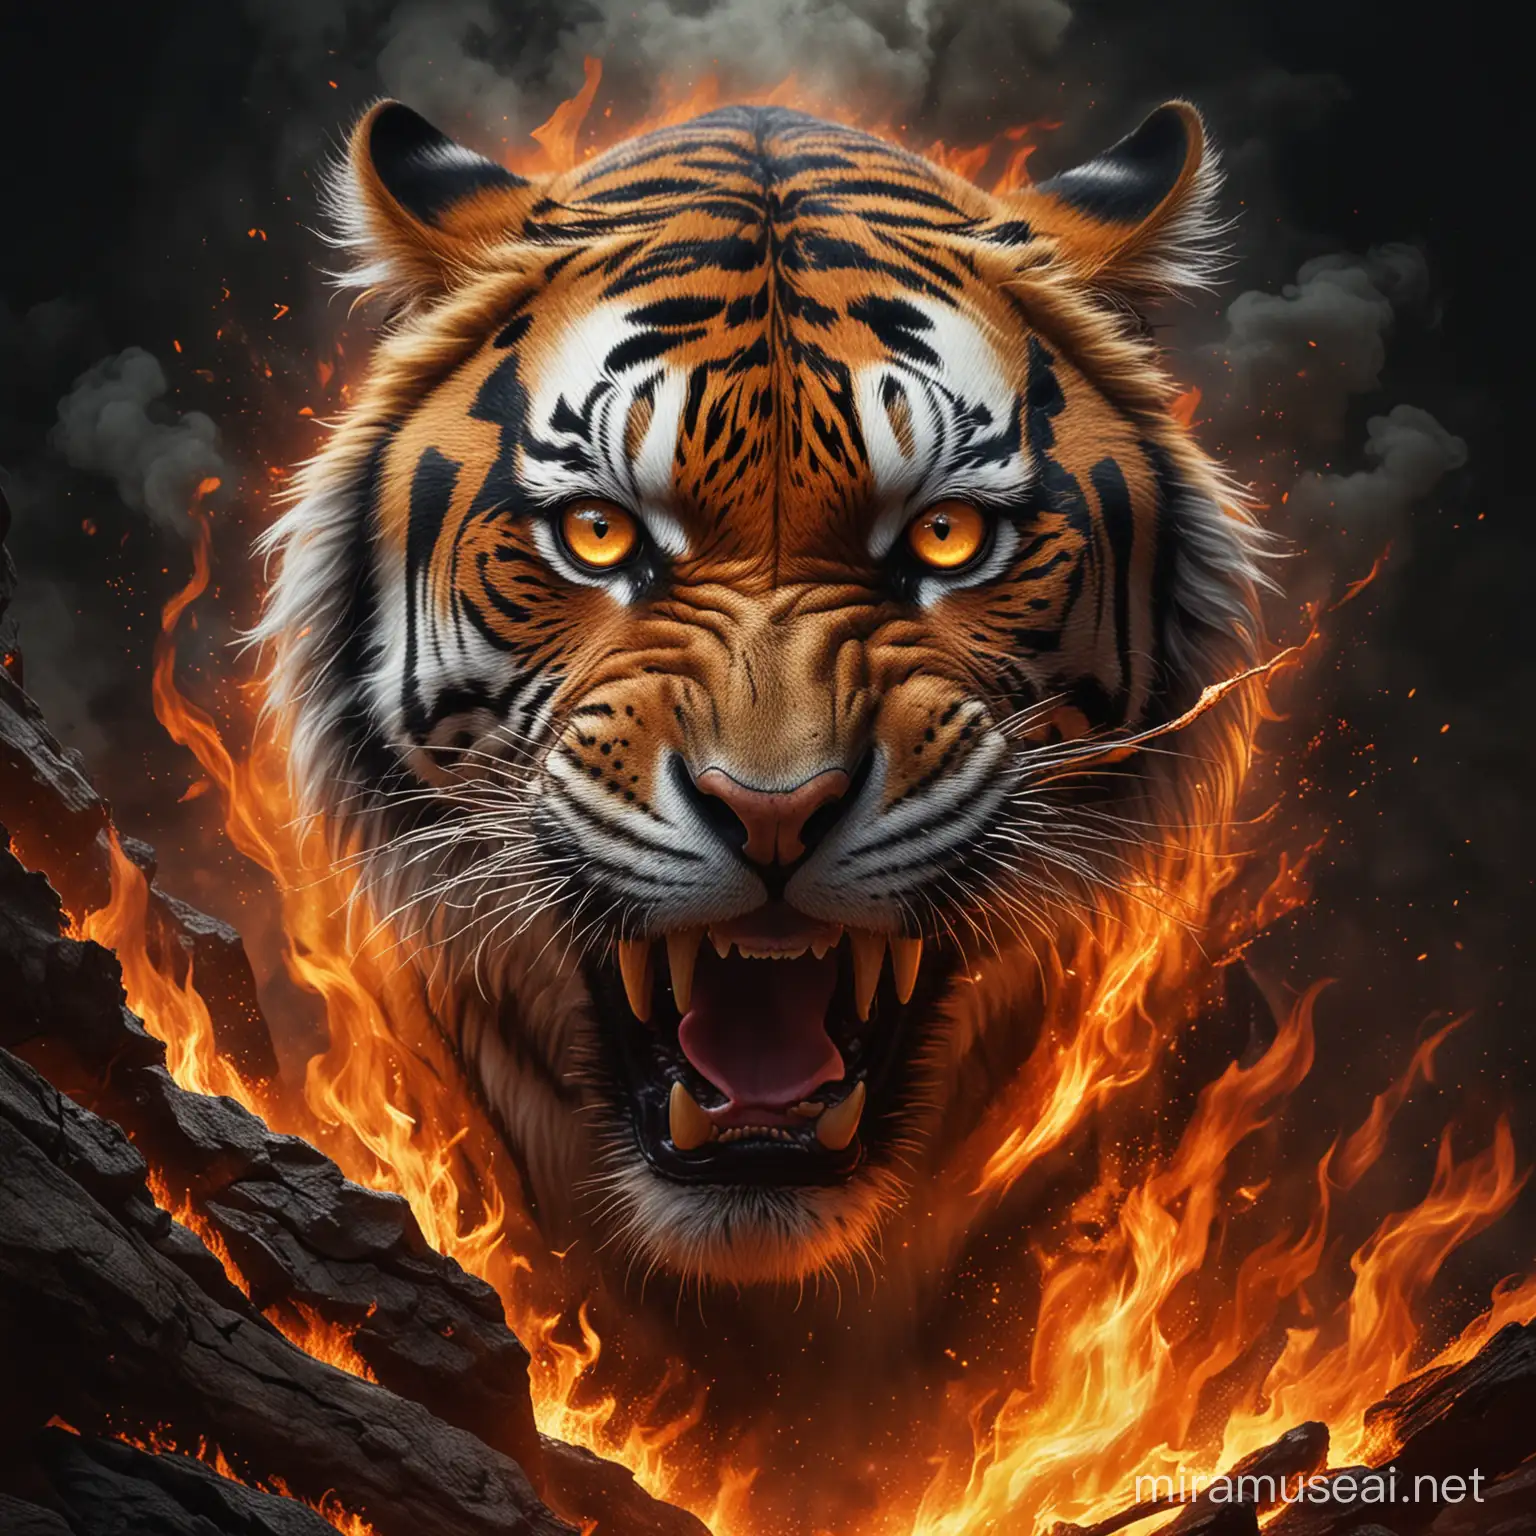 "Experience the raw intensity as a tiger emerges from the flames, its ferocious gaze piercing through the darkness, in this hyper-realistic poster capturing the epitome of primal fury."